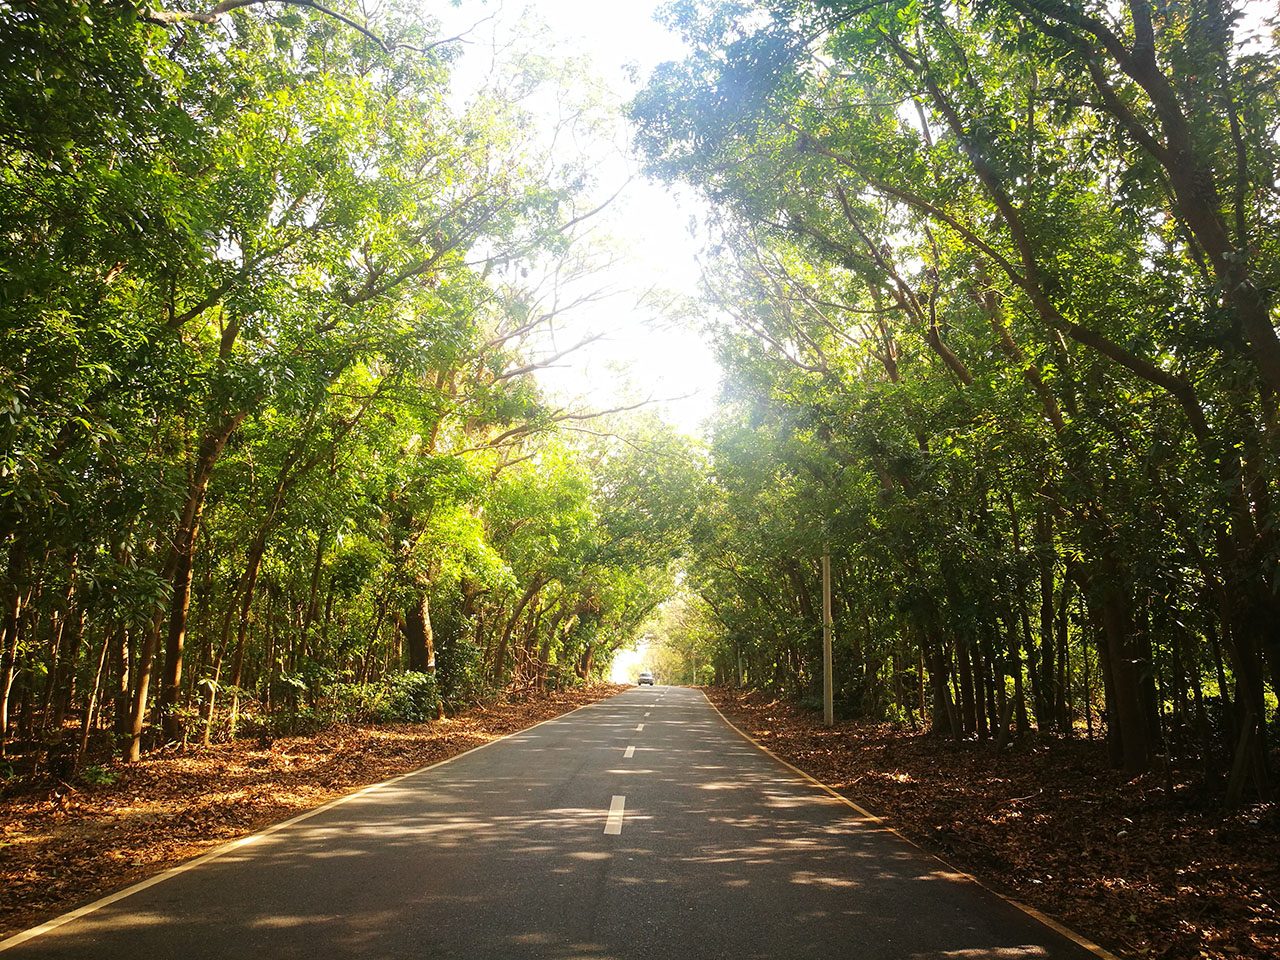 SCENIC ROAD. A scenic road flanked by trees. Photo courtesy of Laurie Mae Gucilatar, Joms Santos, and Eleazar Cuela   